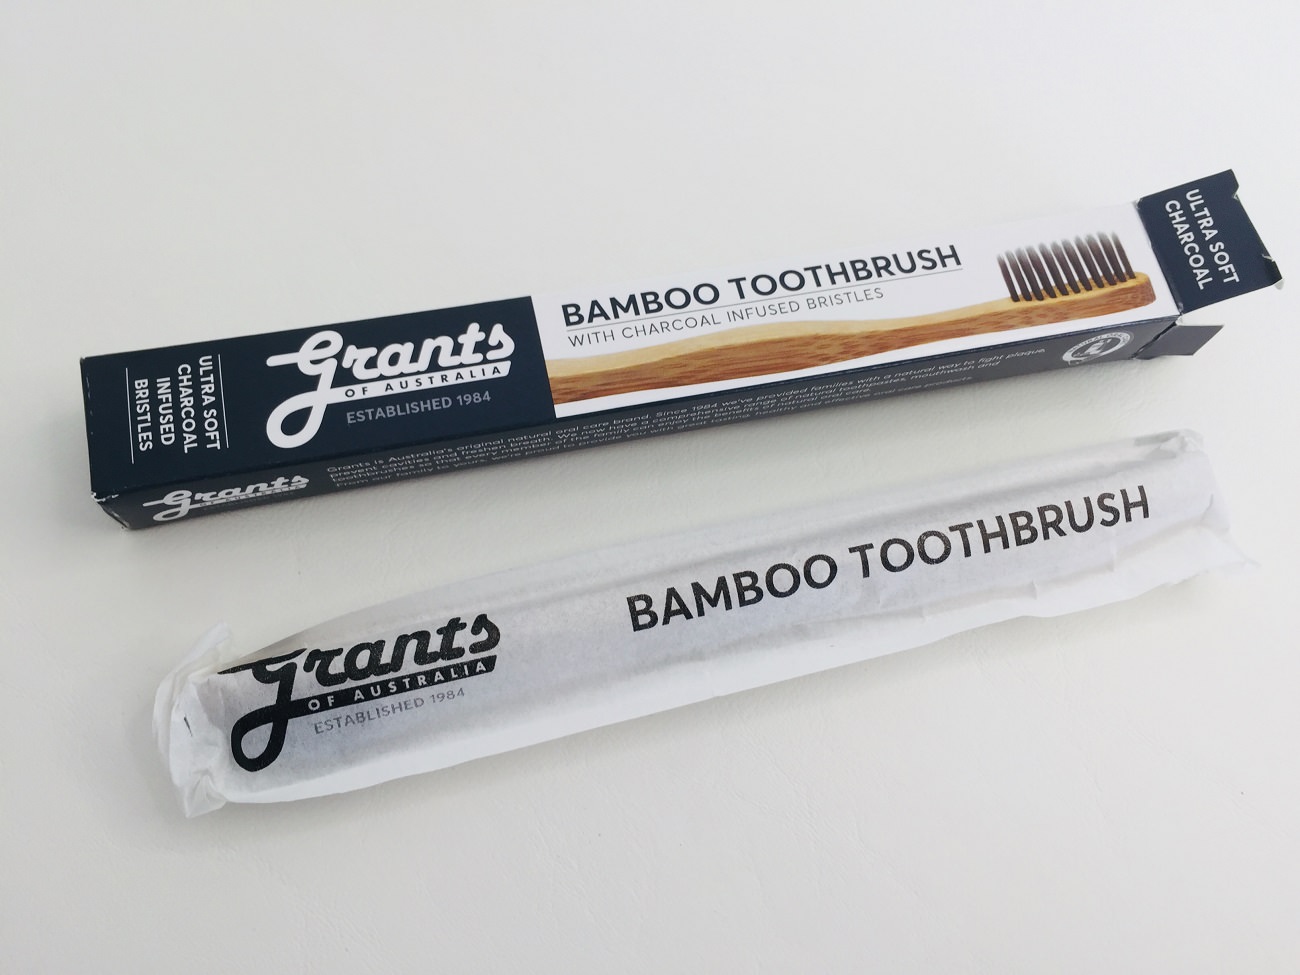 Grants Bamboo Charcoal Toothbrush packaging